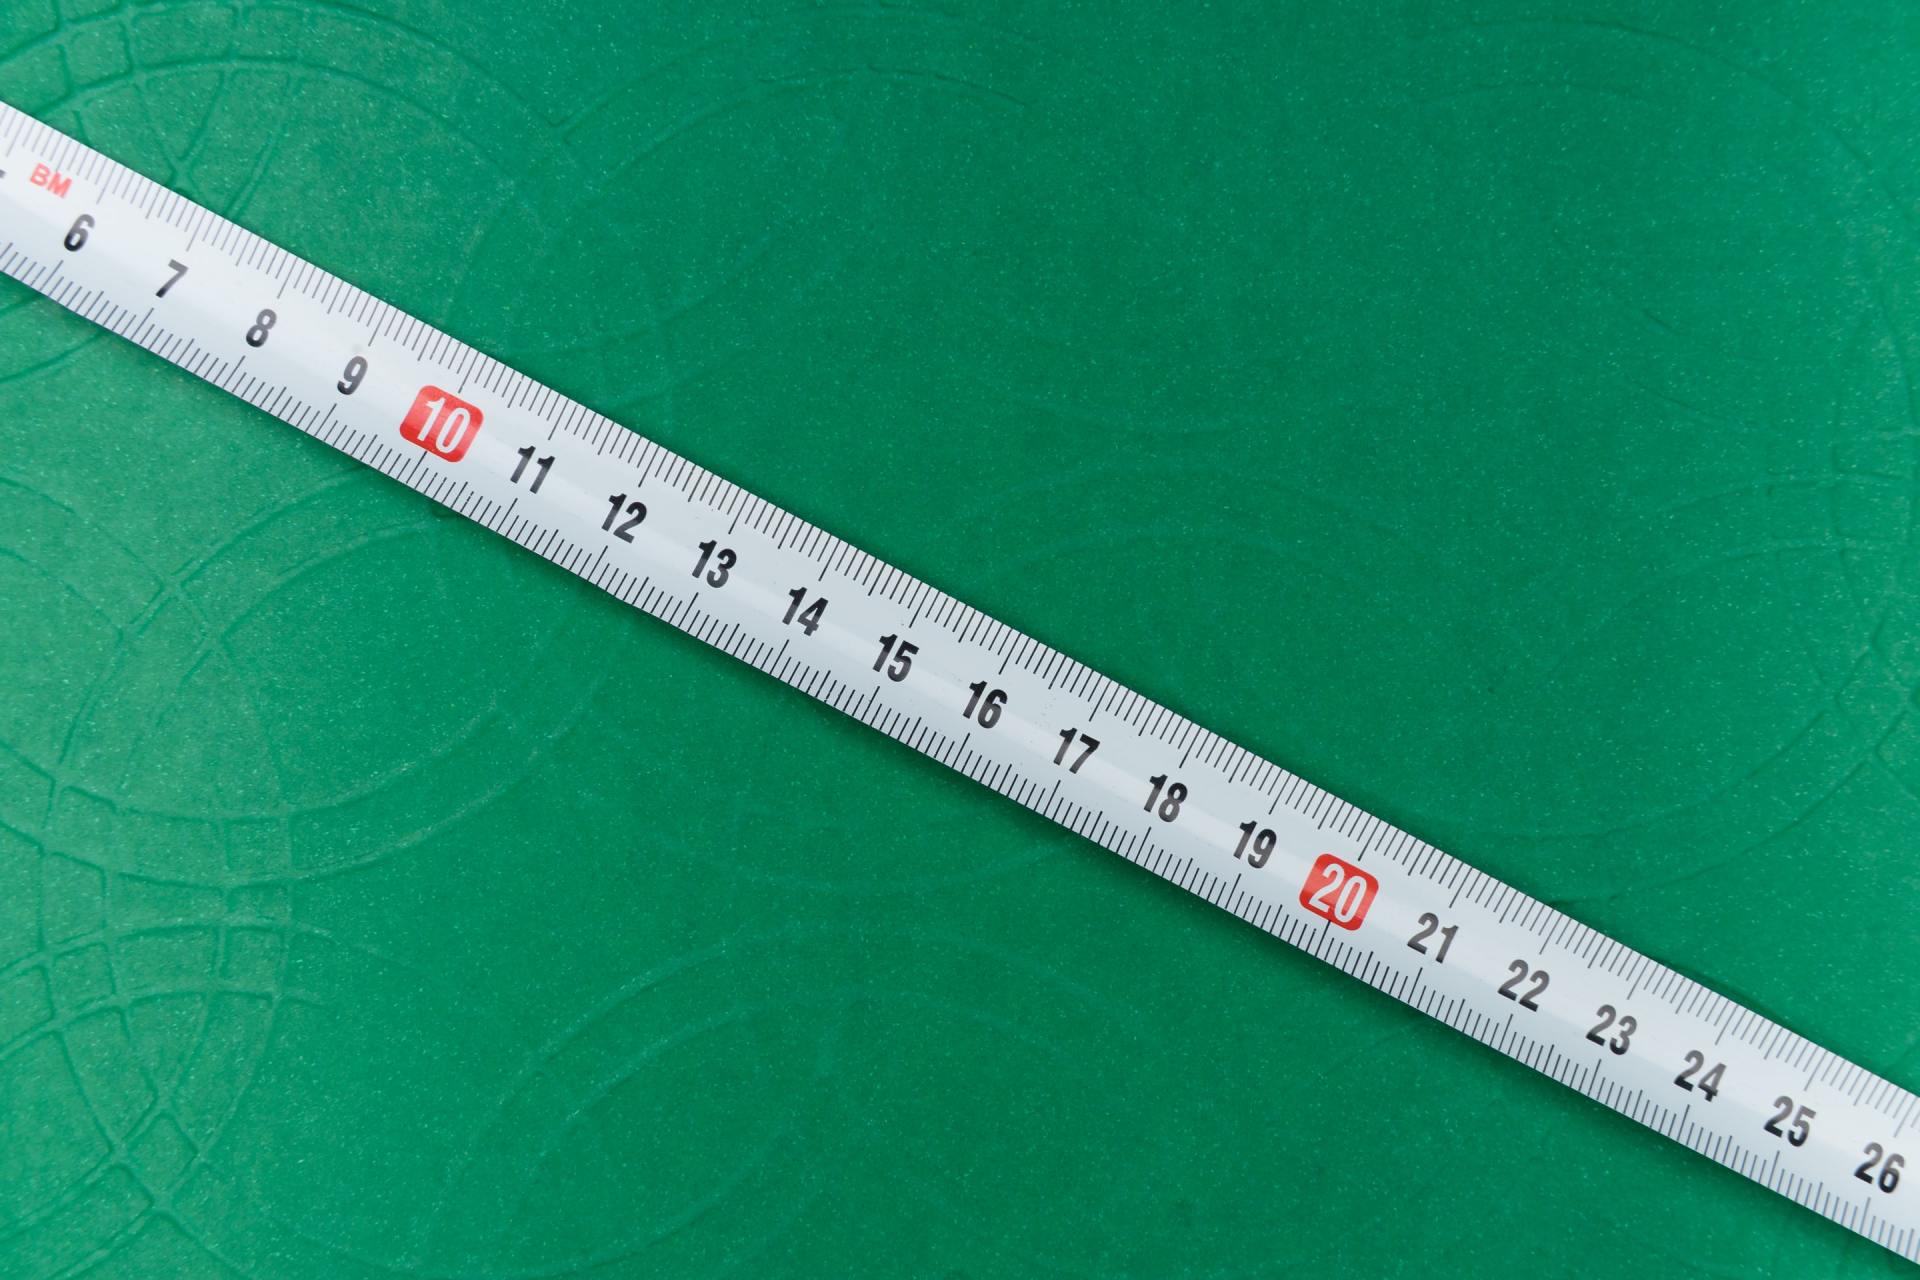 measuring tape on a green textured background